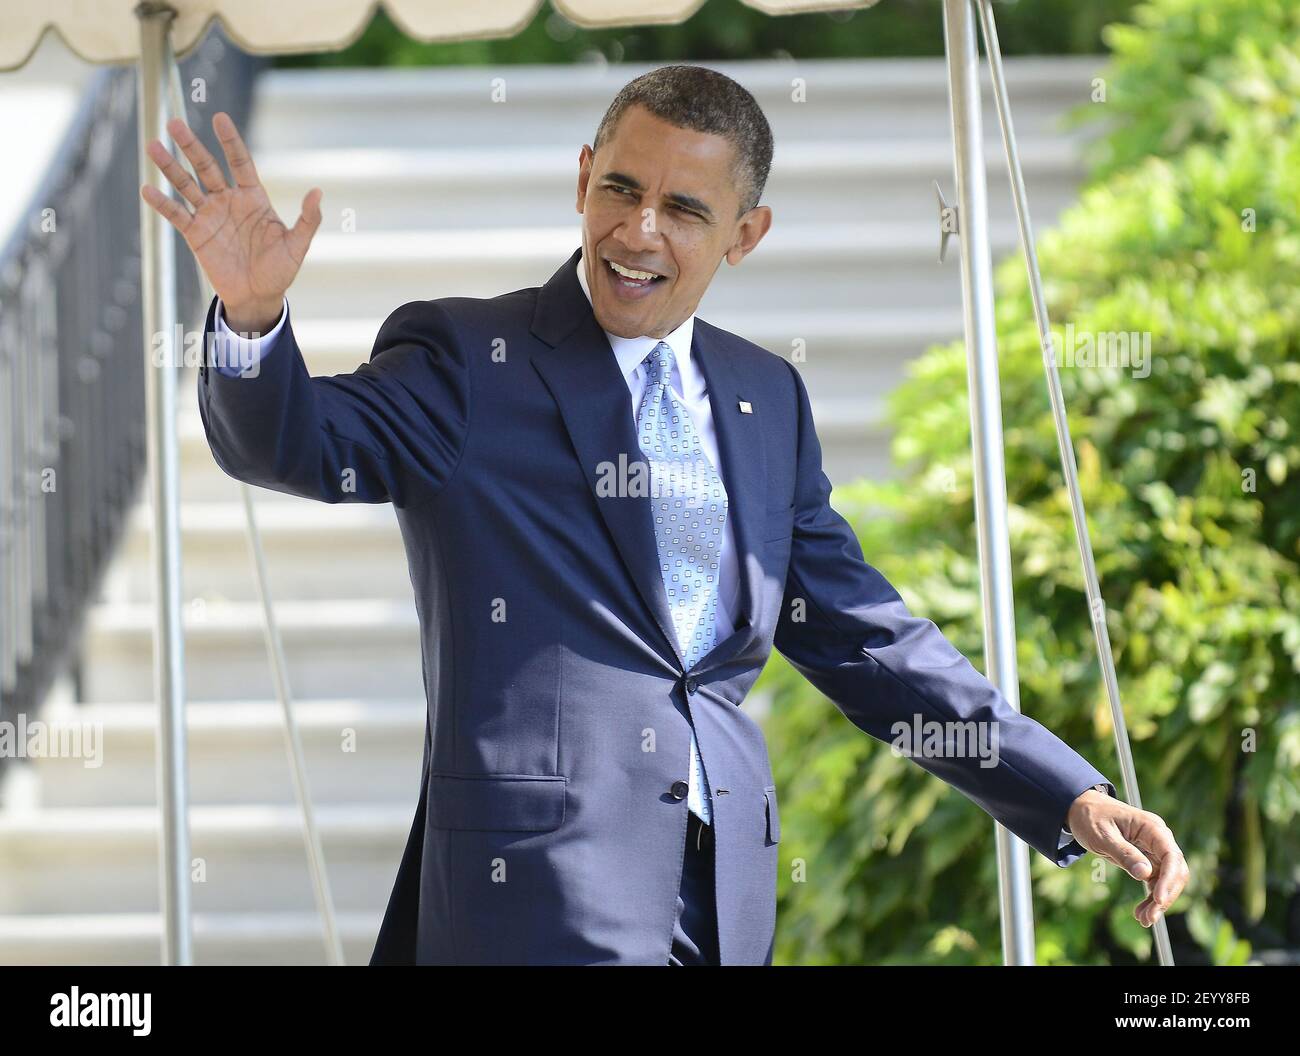 30 September 2012 - Washington, D.C. - United States President Barack Obama waves to the photographers as he departs the White House in Washington, D.C. for Henderson, Nevada on Sunday, September 30, 2012. Photo Credit: Ron Sachs/Pool/Sipa USA Stock Photo